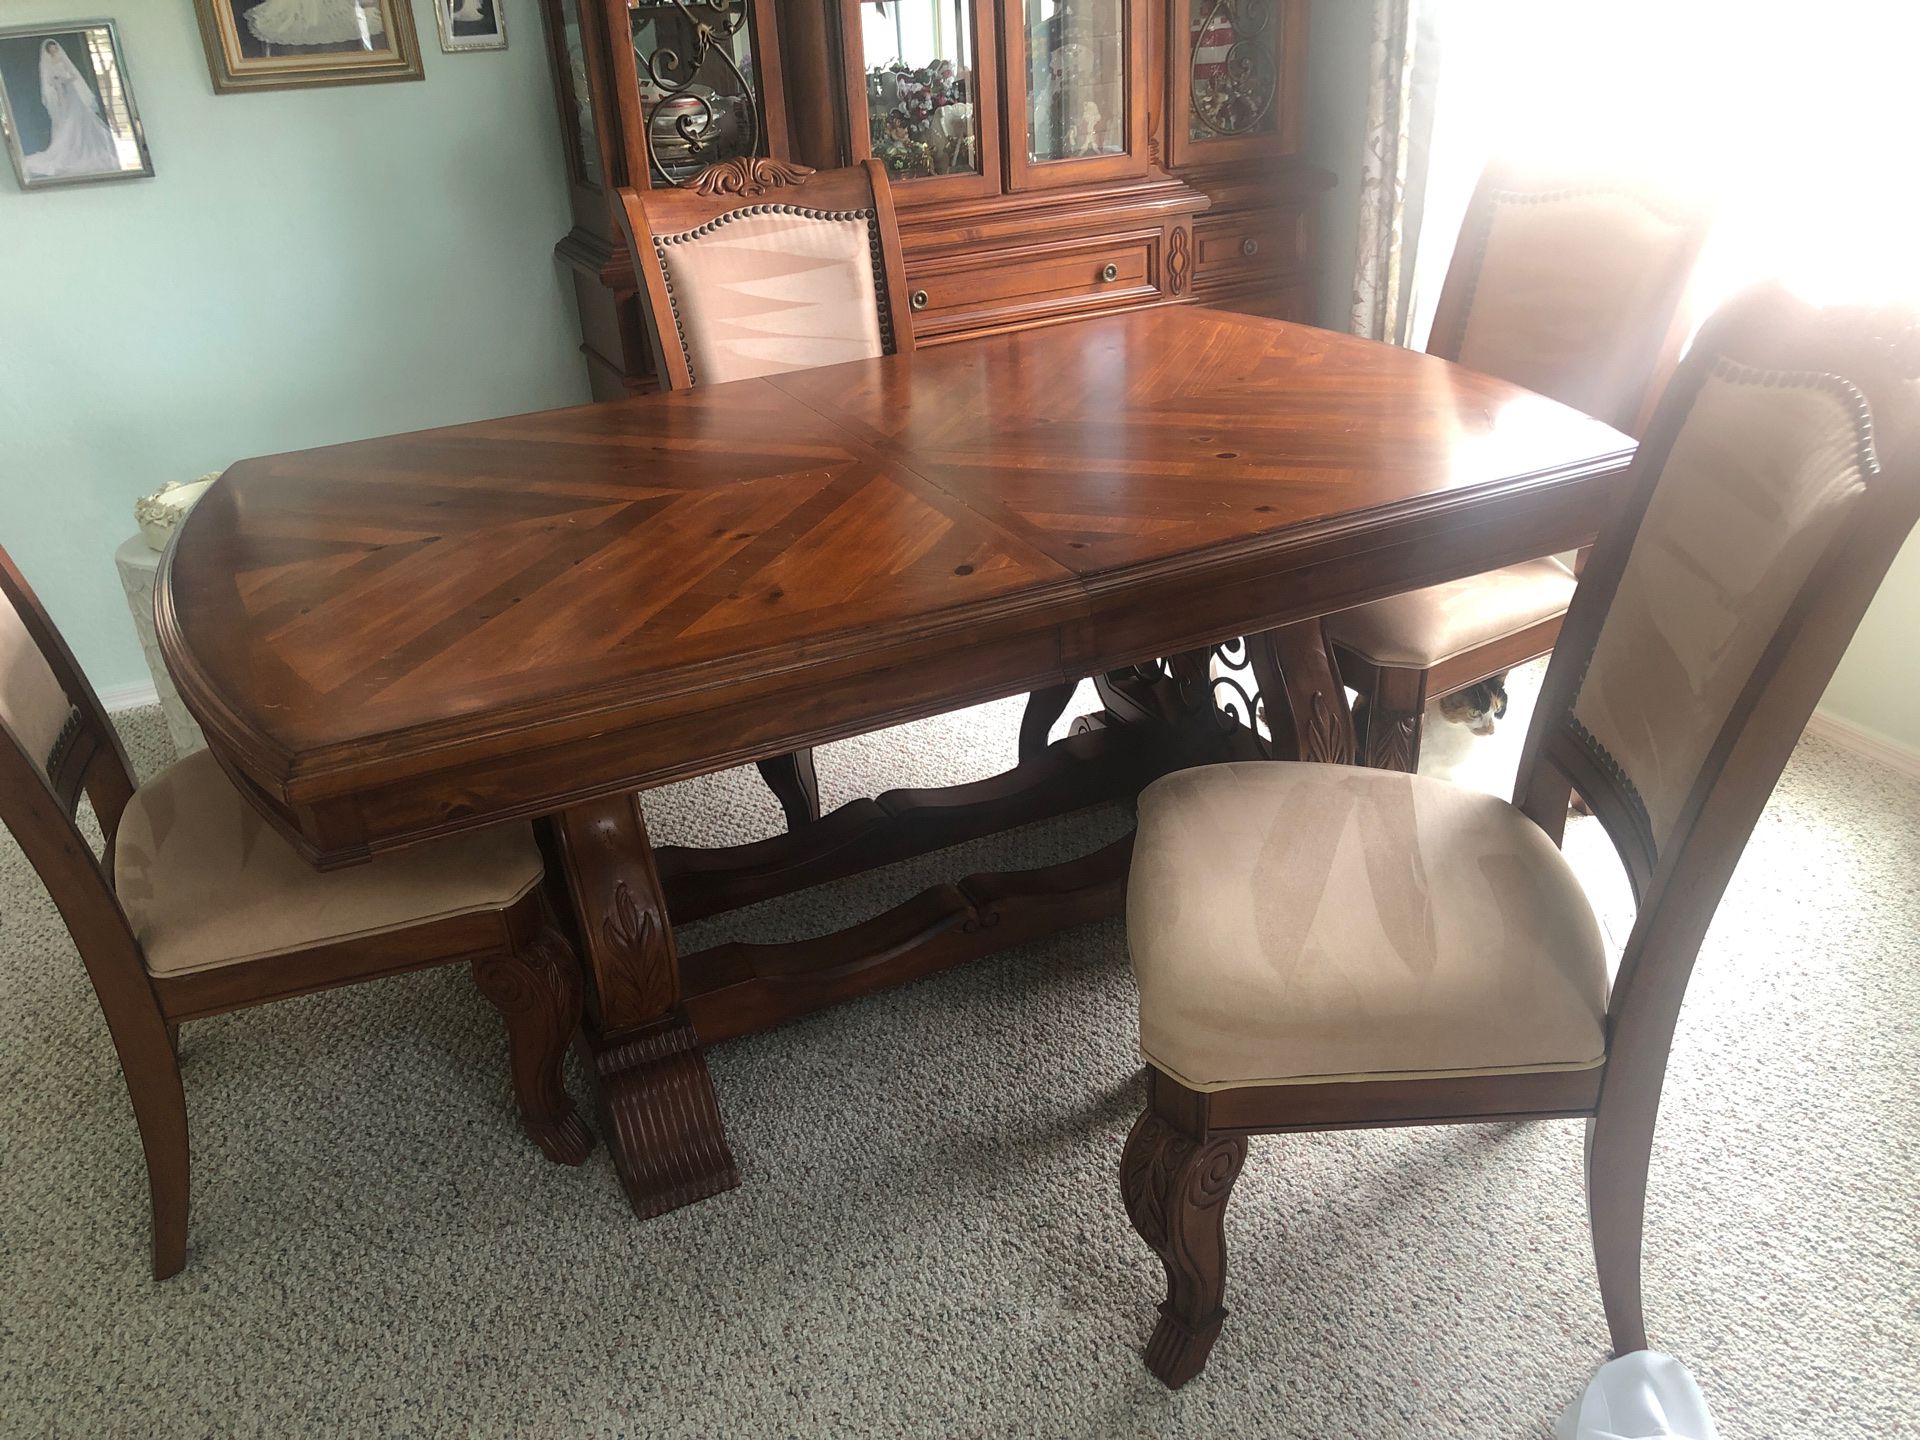 Dining room table with 4 chairs,& extra leaf. China cabinet (China not included)